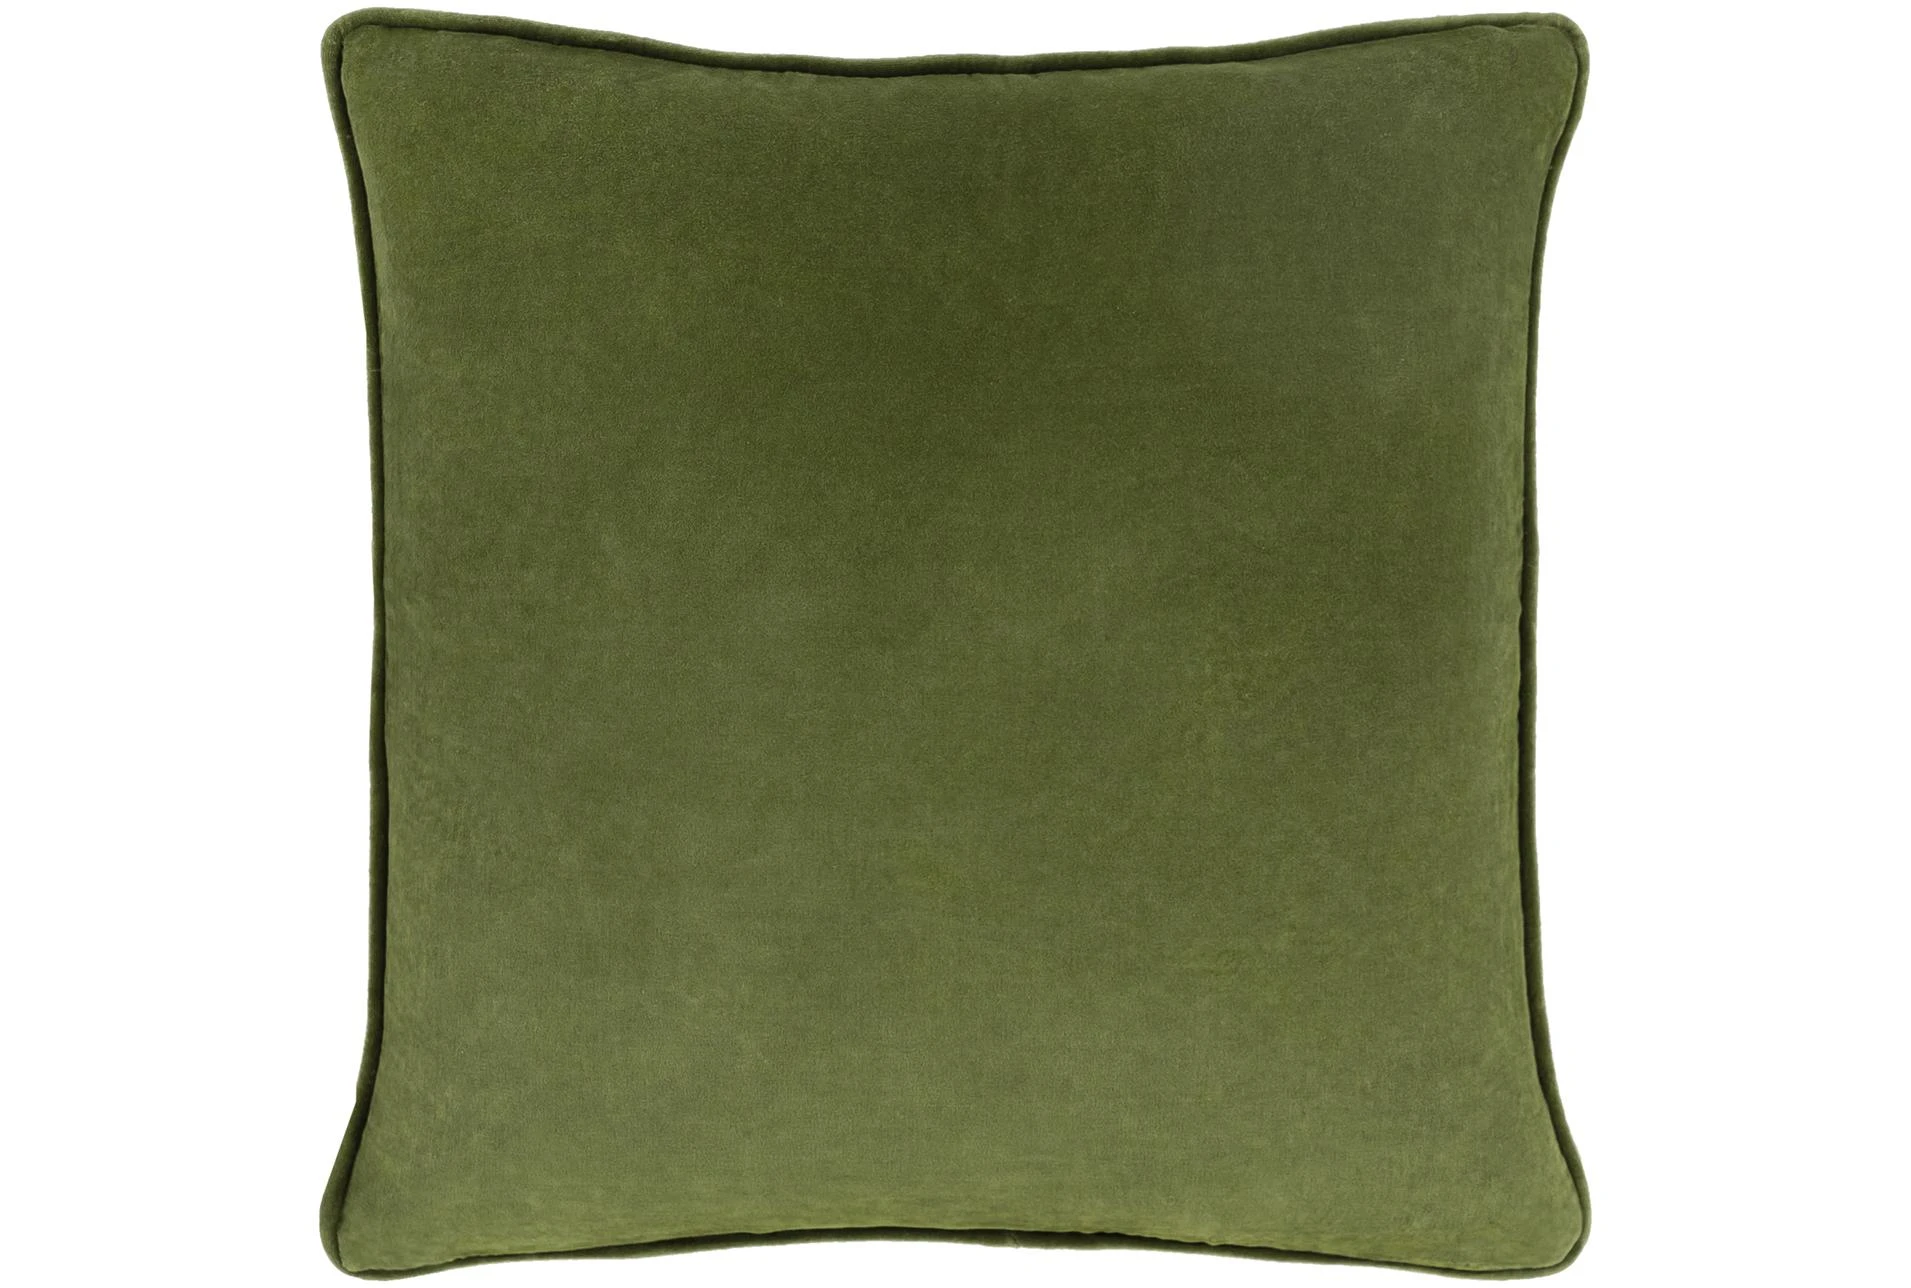 Sage Olive Green White Throw Pillow Mix and Match Indoor Outdoor